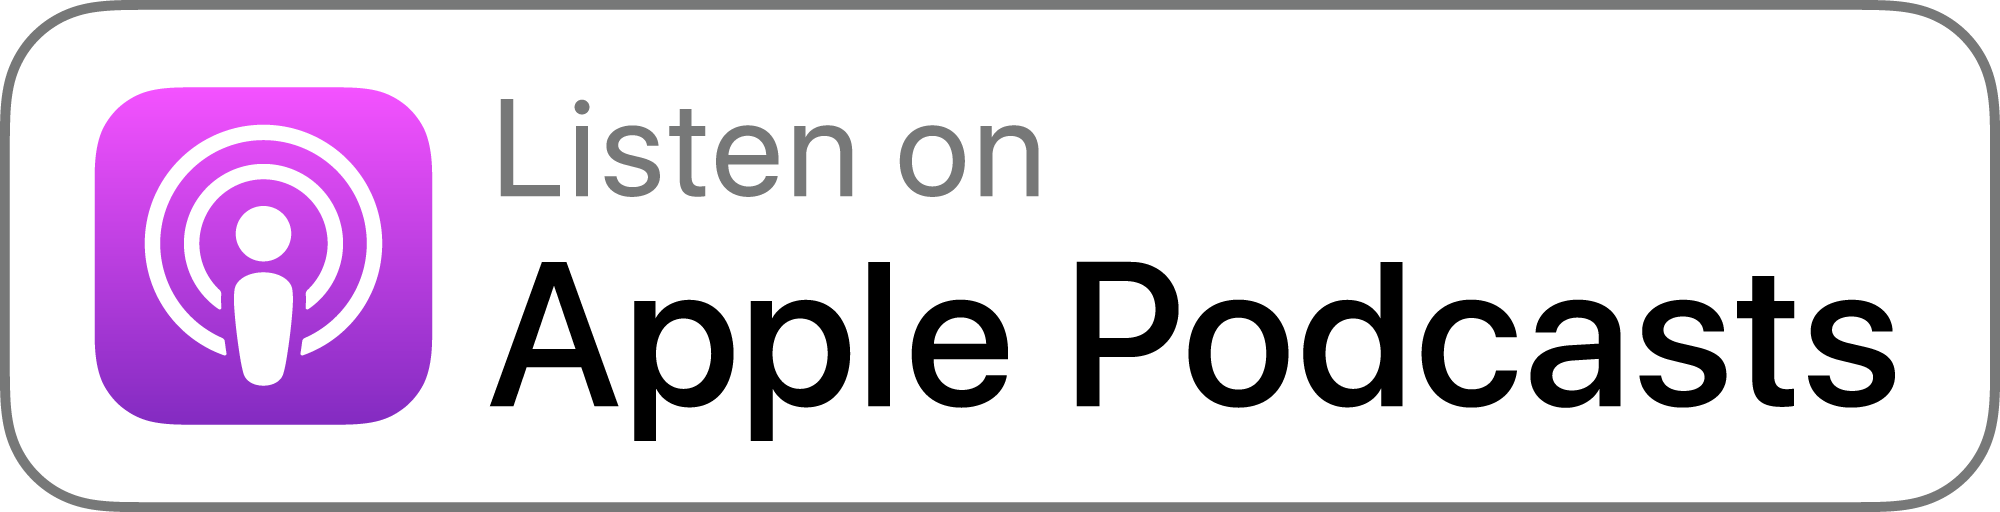 Listen_on_Apple_Podcasts_sRGB_US.png